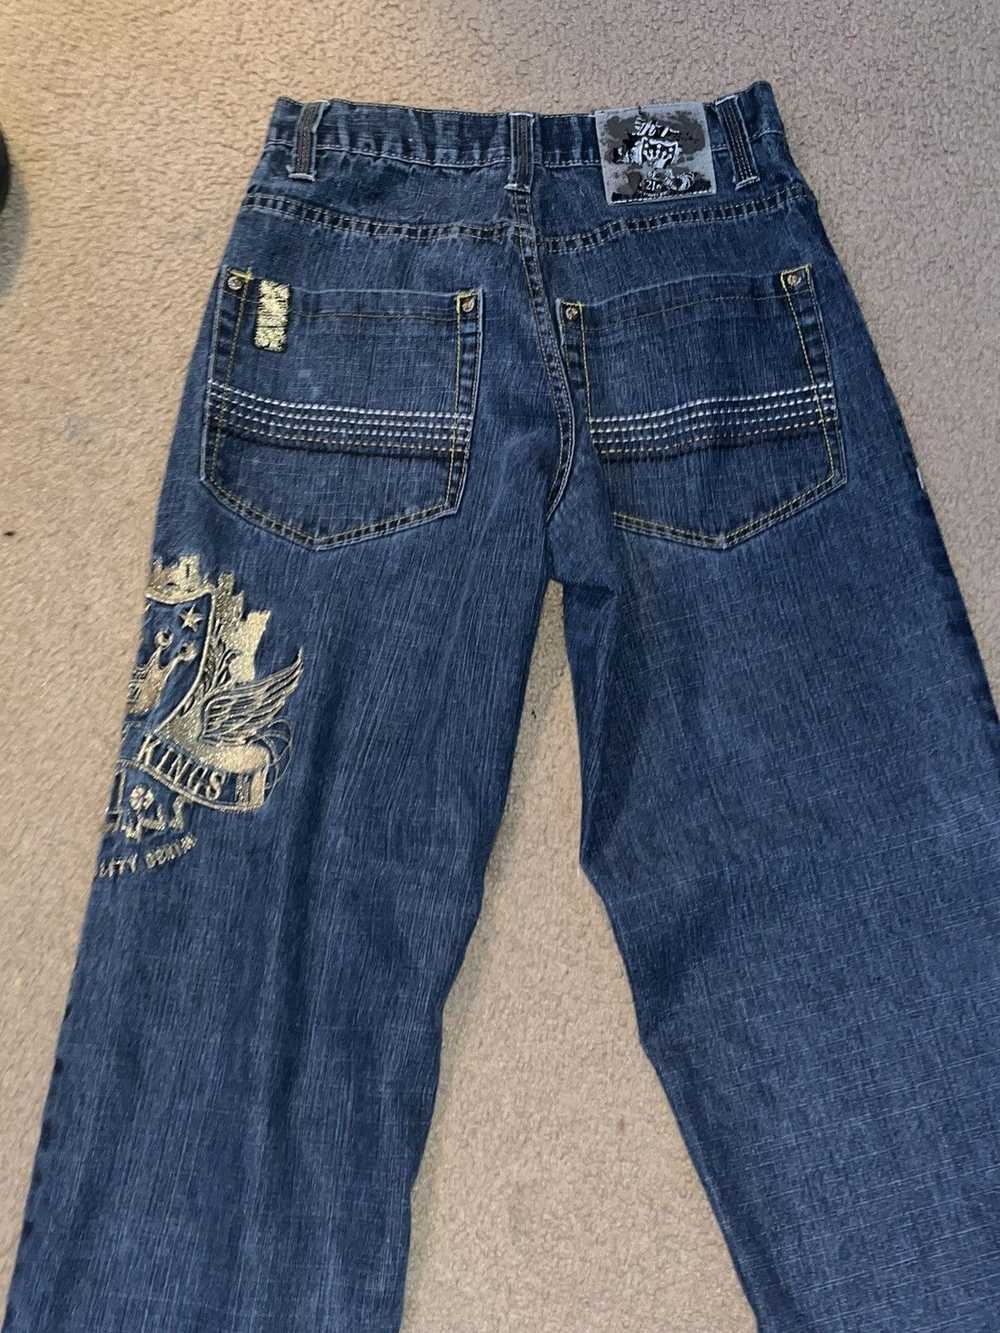 Southpole Baggy Southpole Jeans W Embroidery - image 5